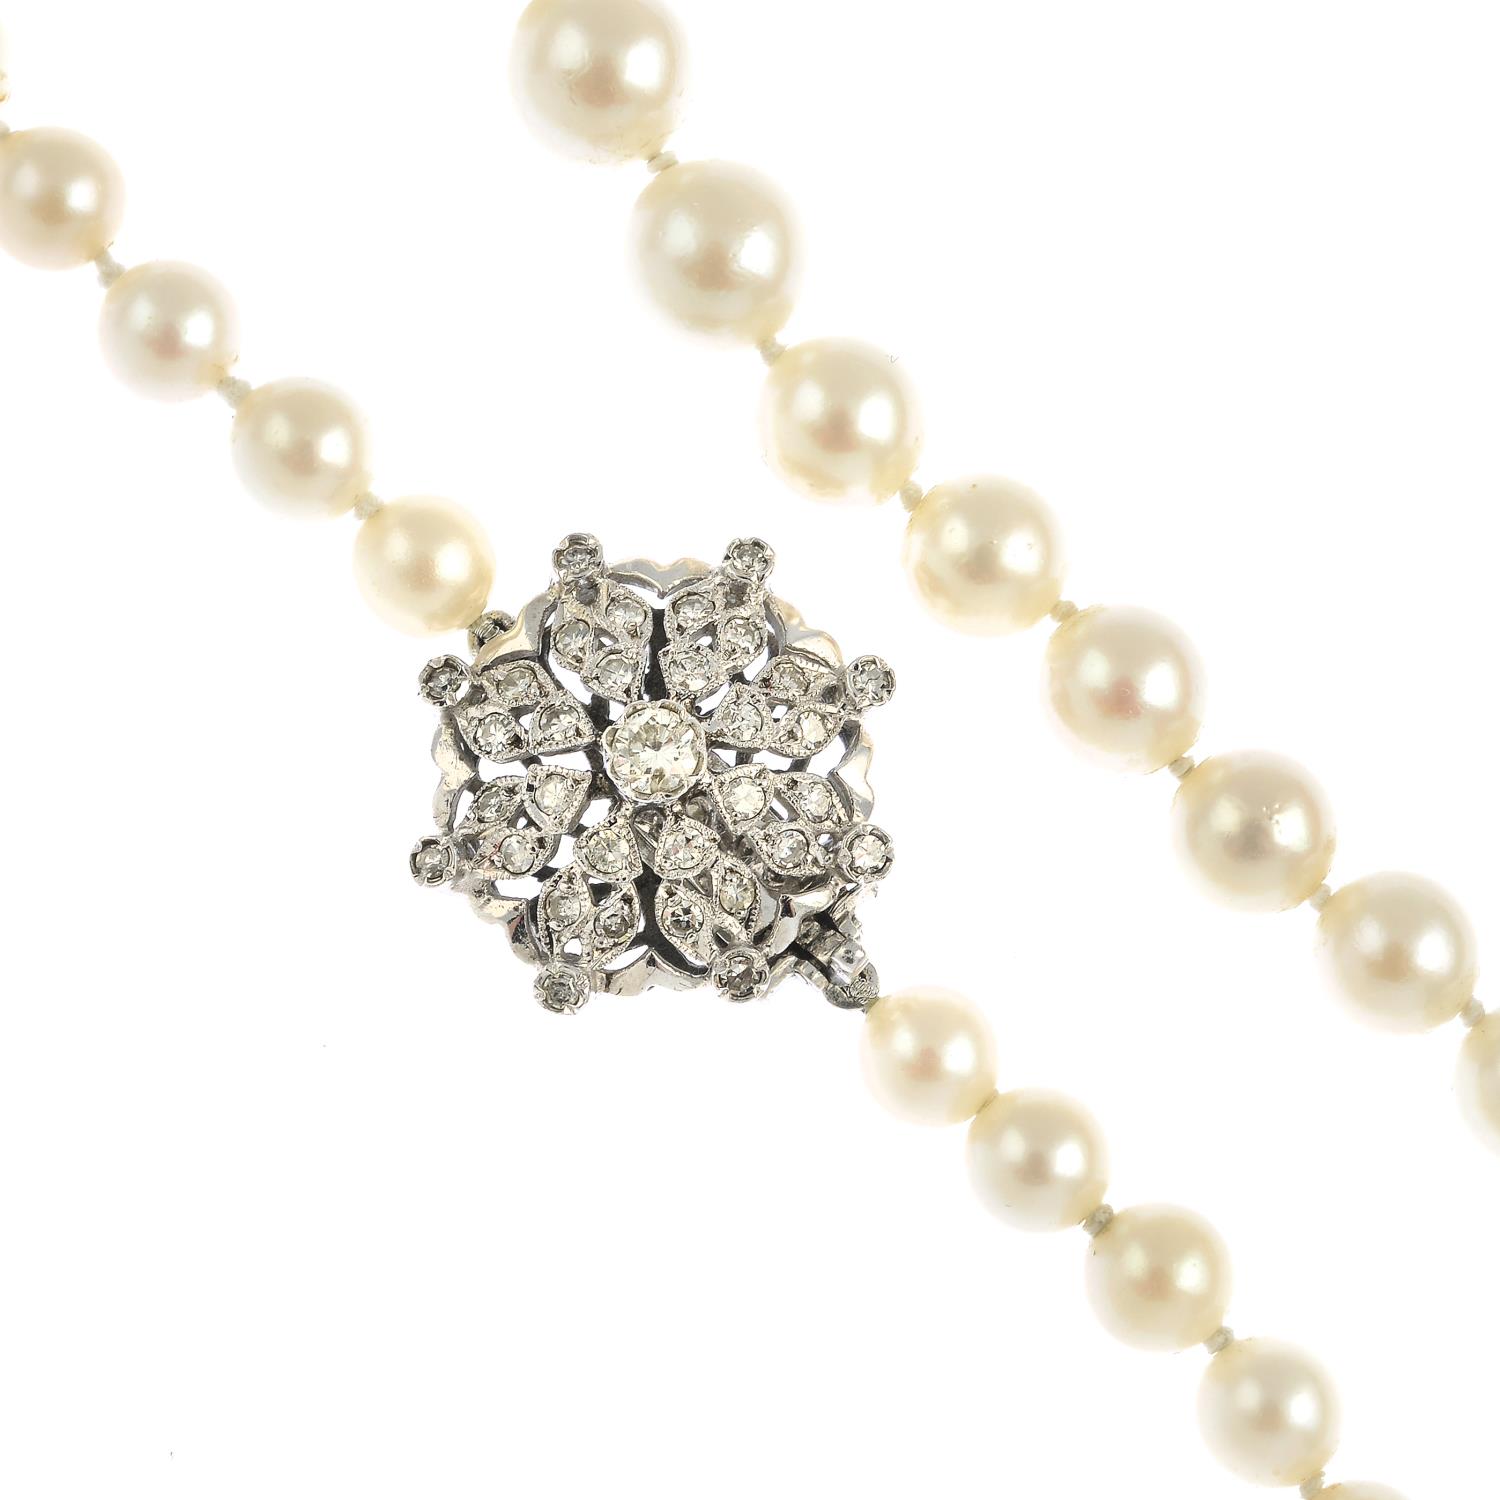 A cultured pearl necklace with diamond clasp.Approximate diameter of cultured pearls 7 to 9.5mms.